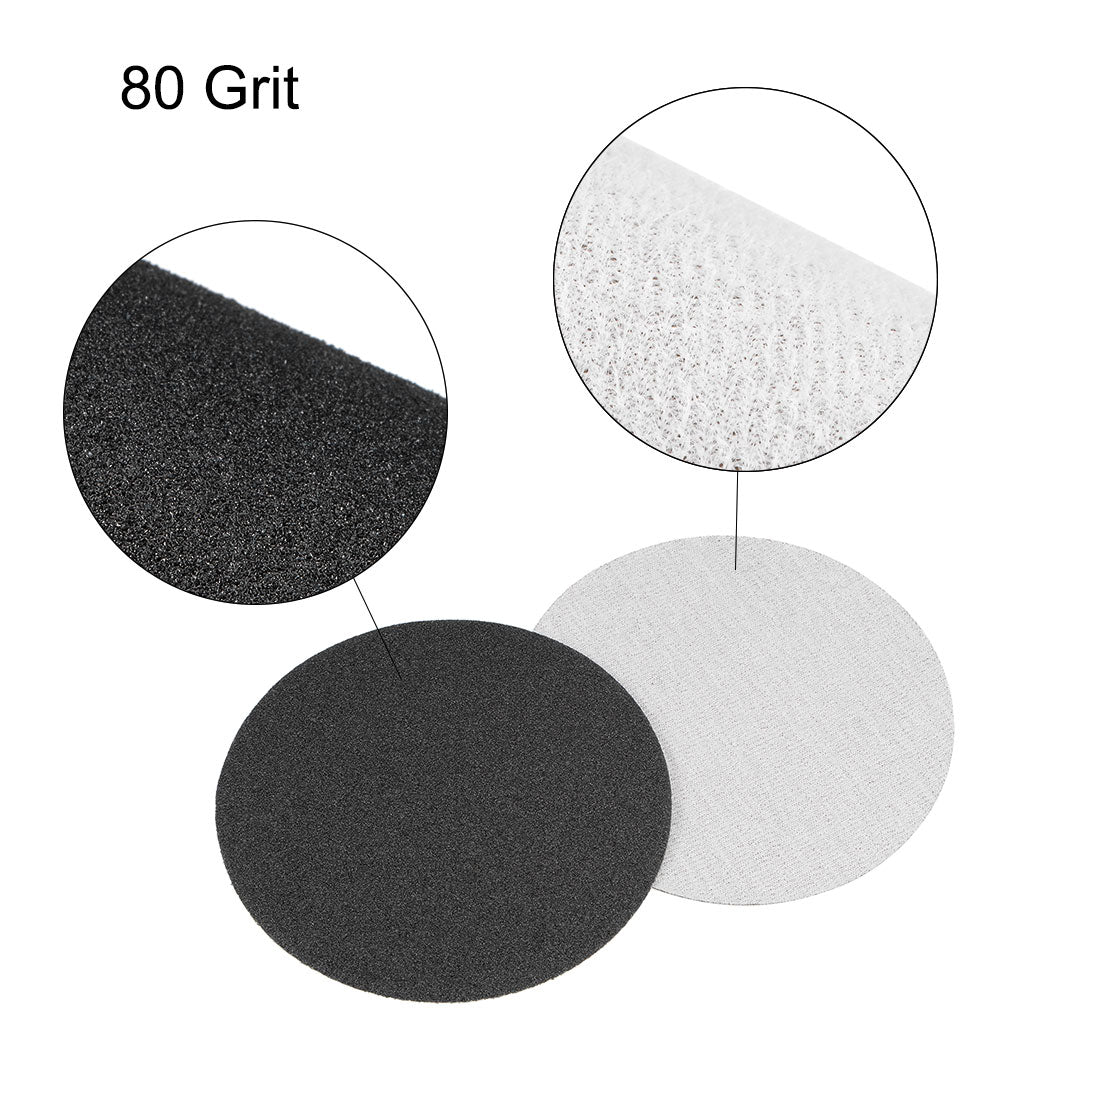 Uxcell Uxcell 5 inch Wet Dry Disc 320 Grit Hook and Loop Sanding Disc Silicon Carbide 10pcs